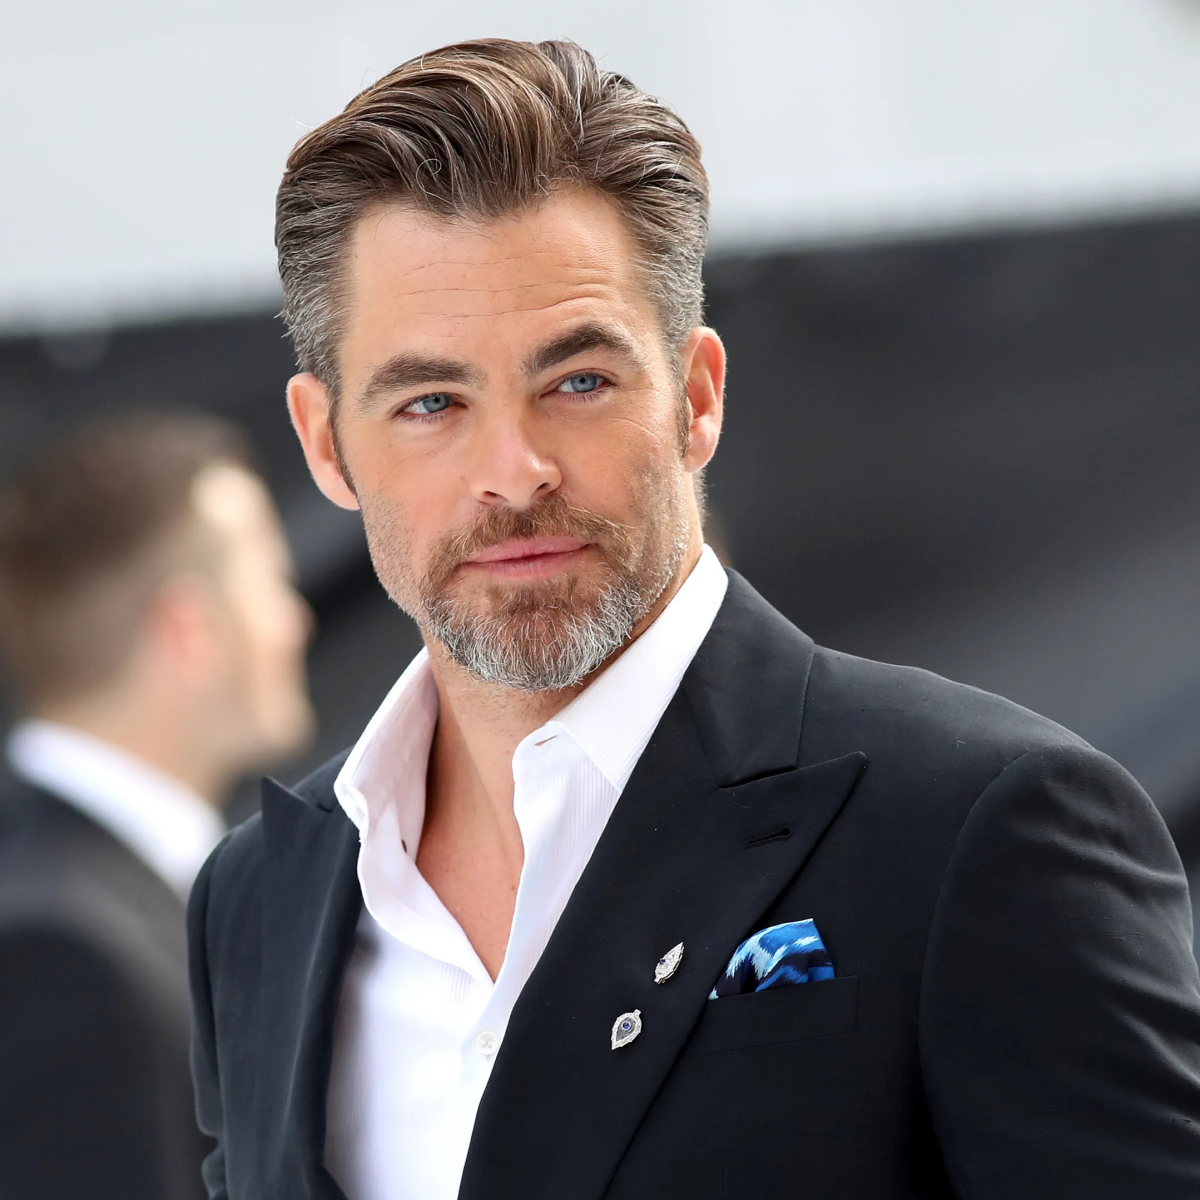 hairstyles for men over 50 chris pine slicked back look